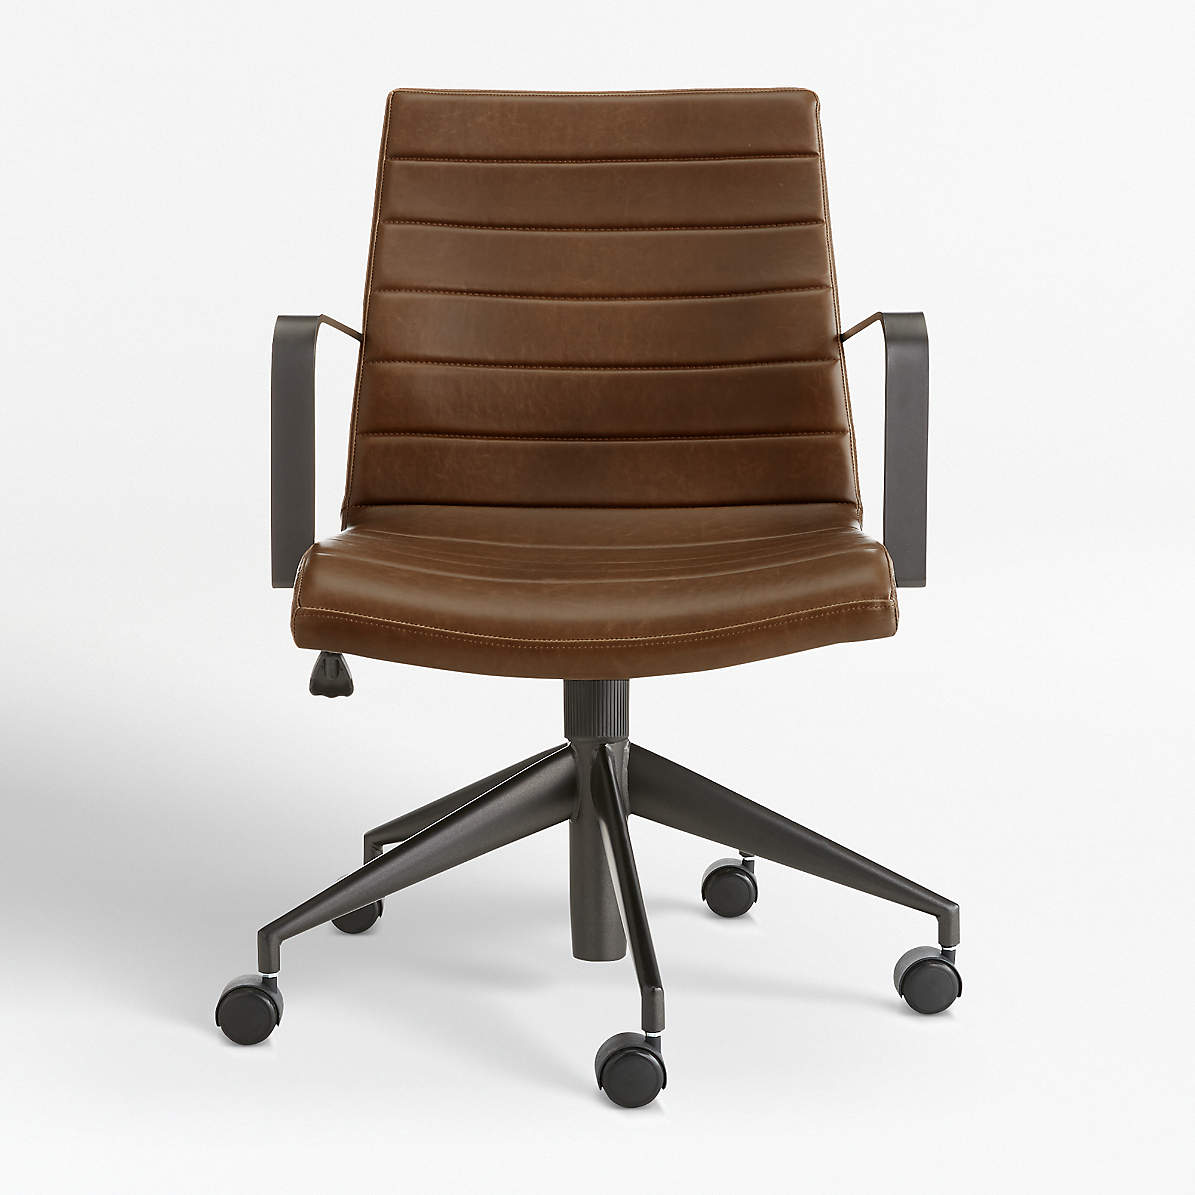 Brown Office Chair : Graham Brown Leather Desk Chair Reviews Crate And